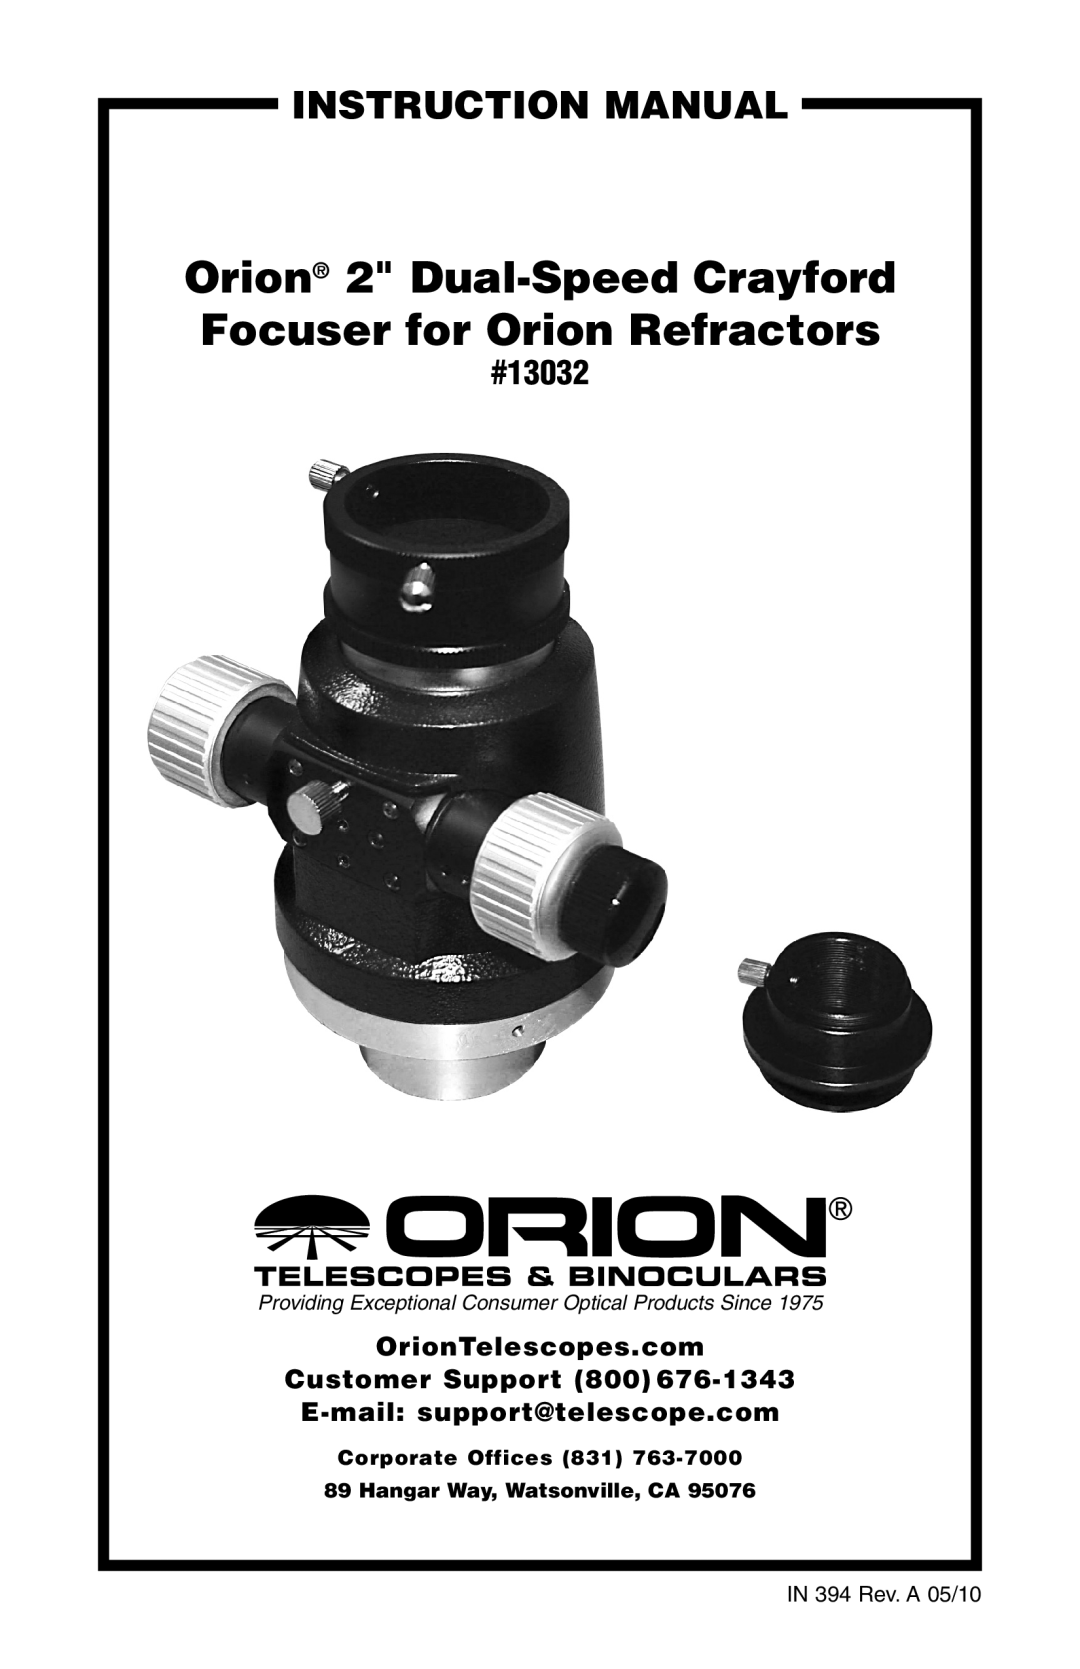 Orion instruction manual #13032, E-mail support@telescope.com, Corporate Offices, Hangar Way, Watsonville, CA 